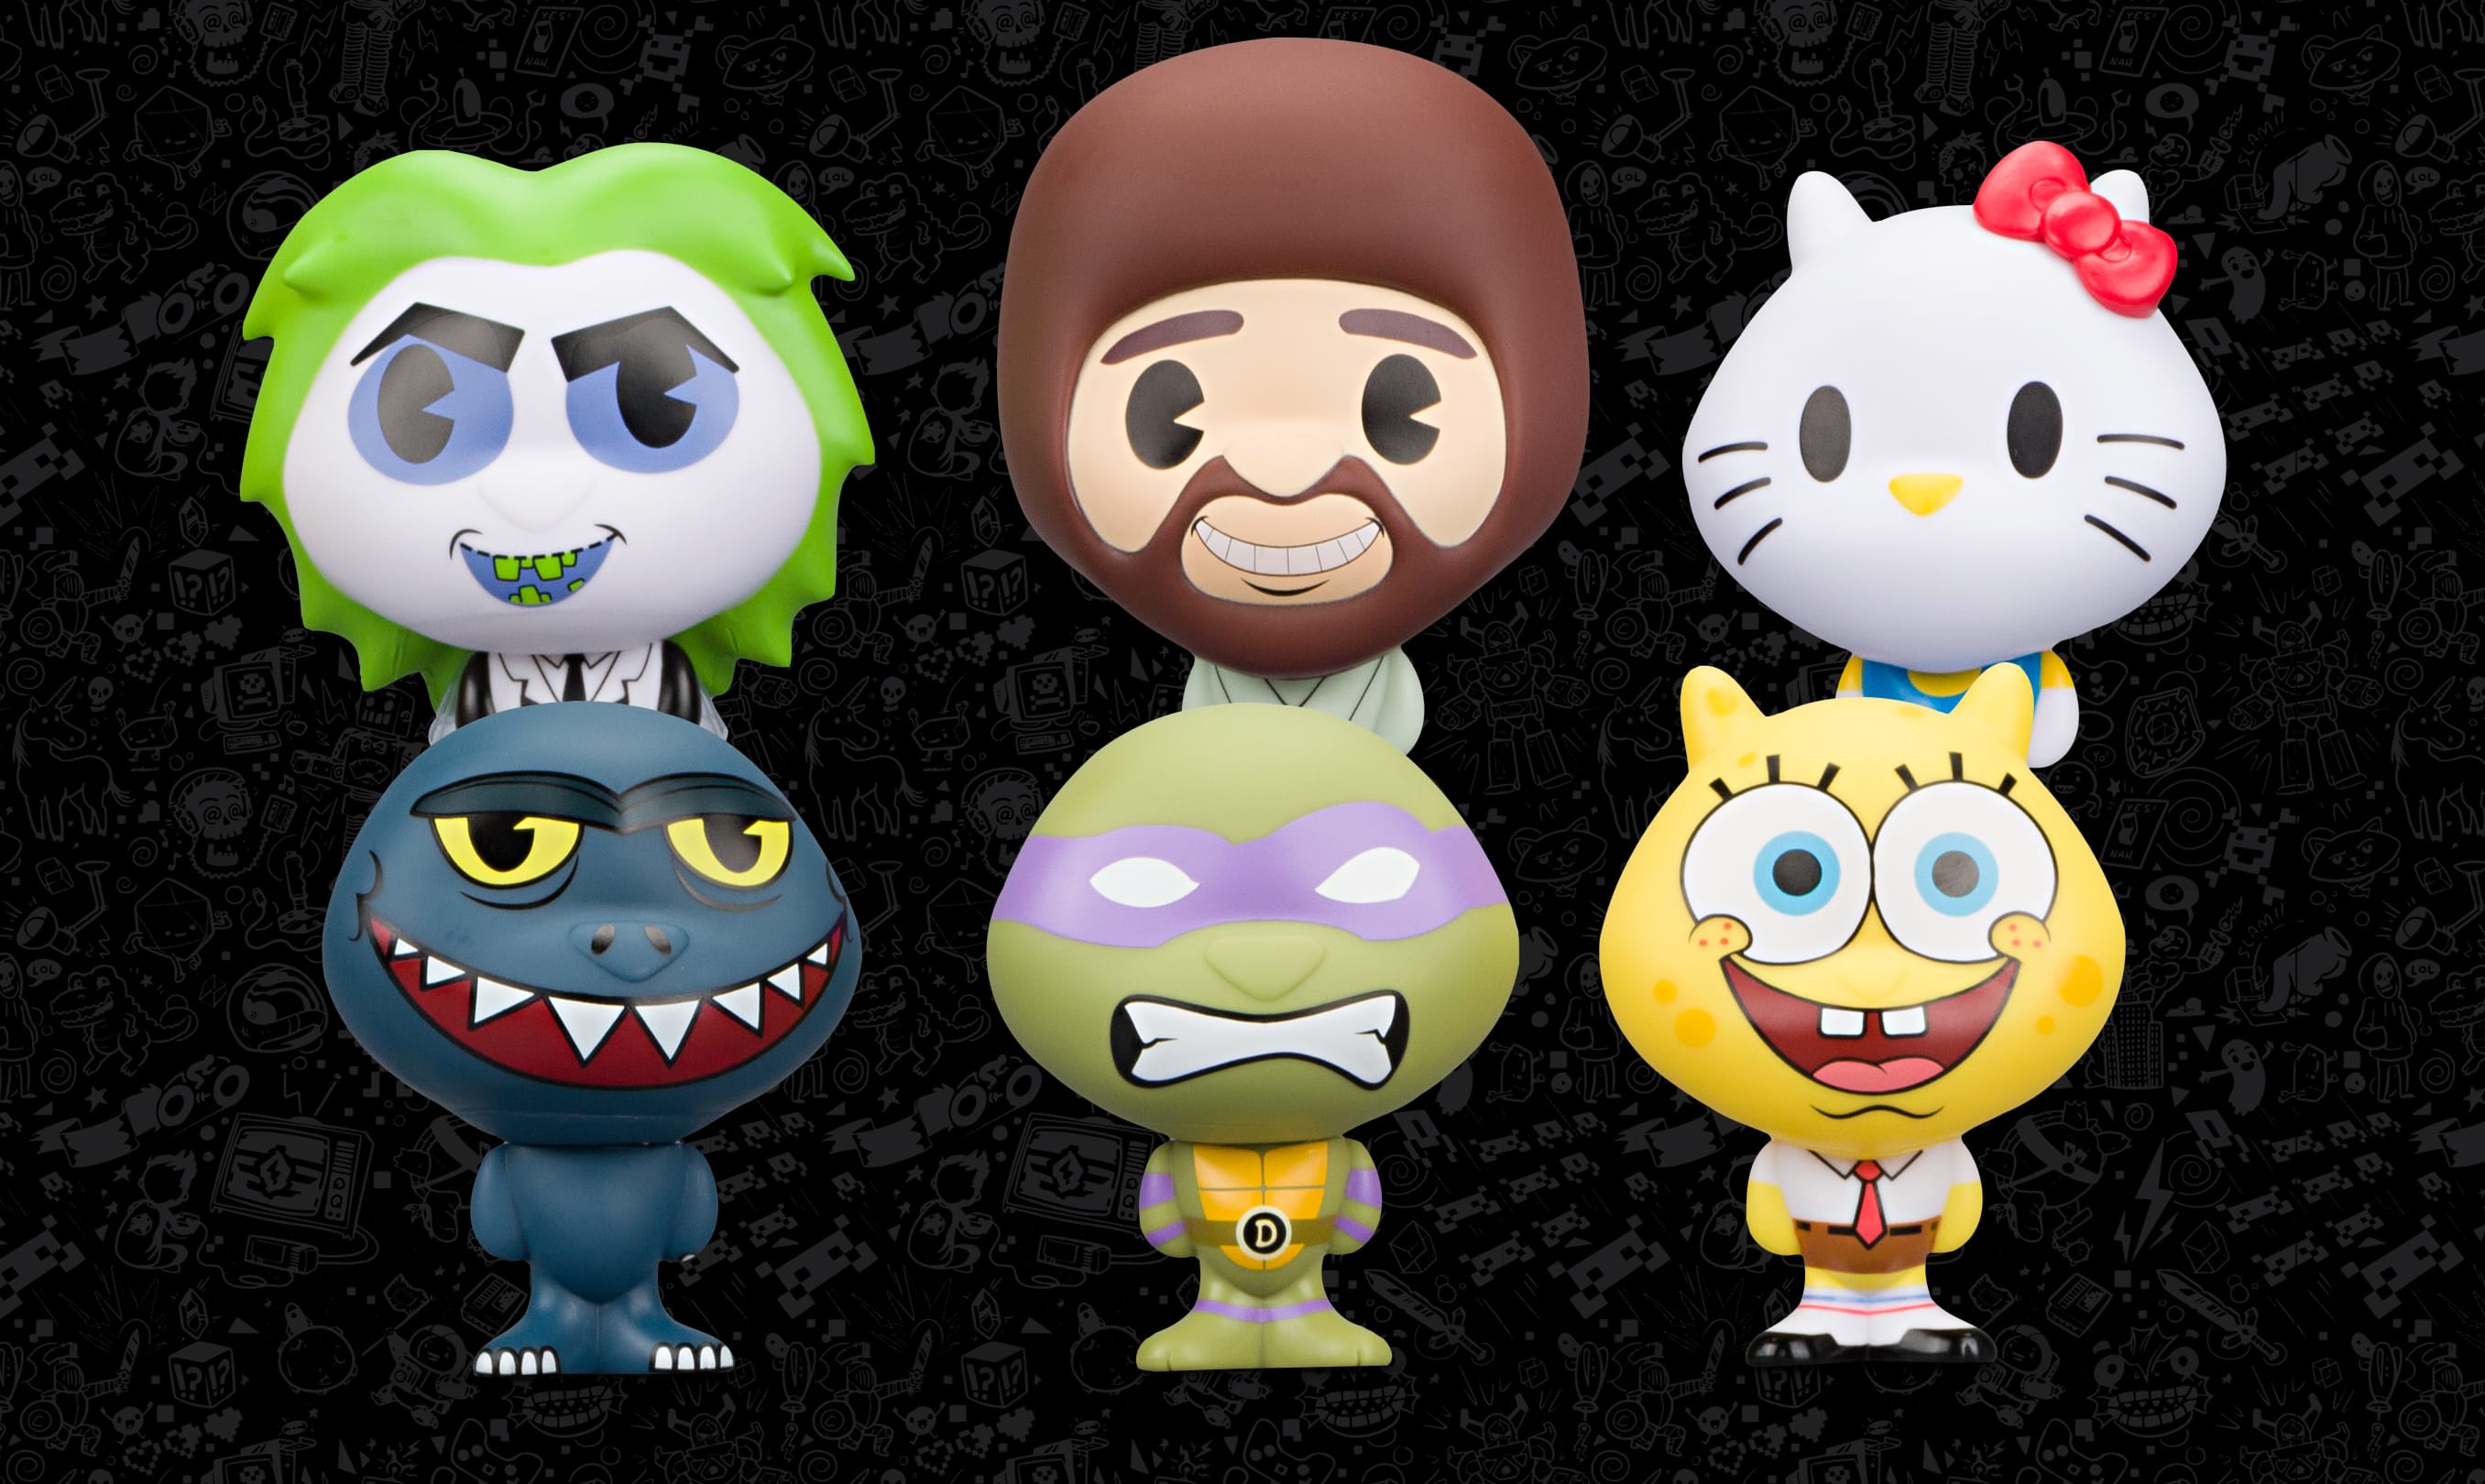 The Daily Crate | BHUNNY: Introducing a New Figure Series by Kidrobot!